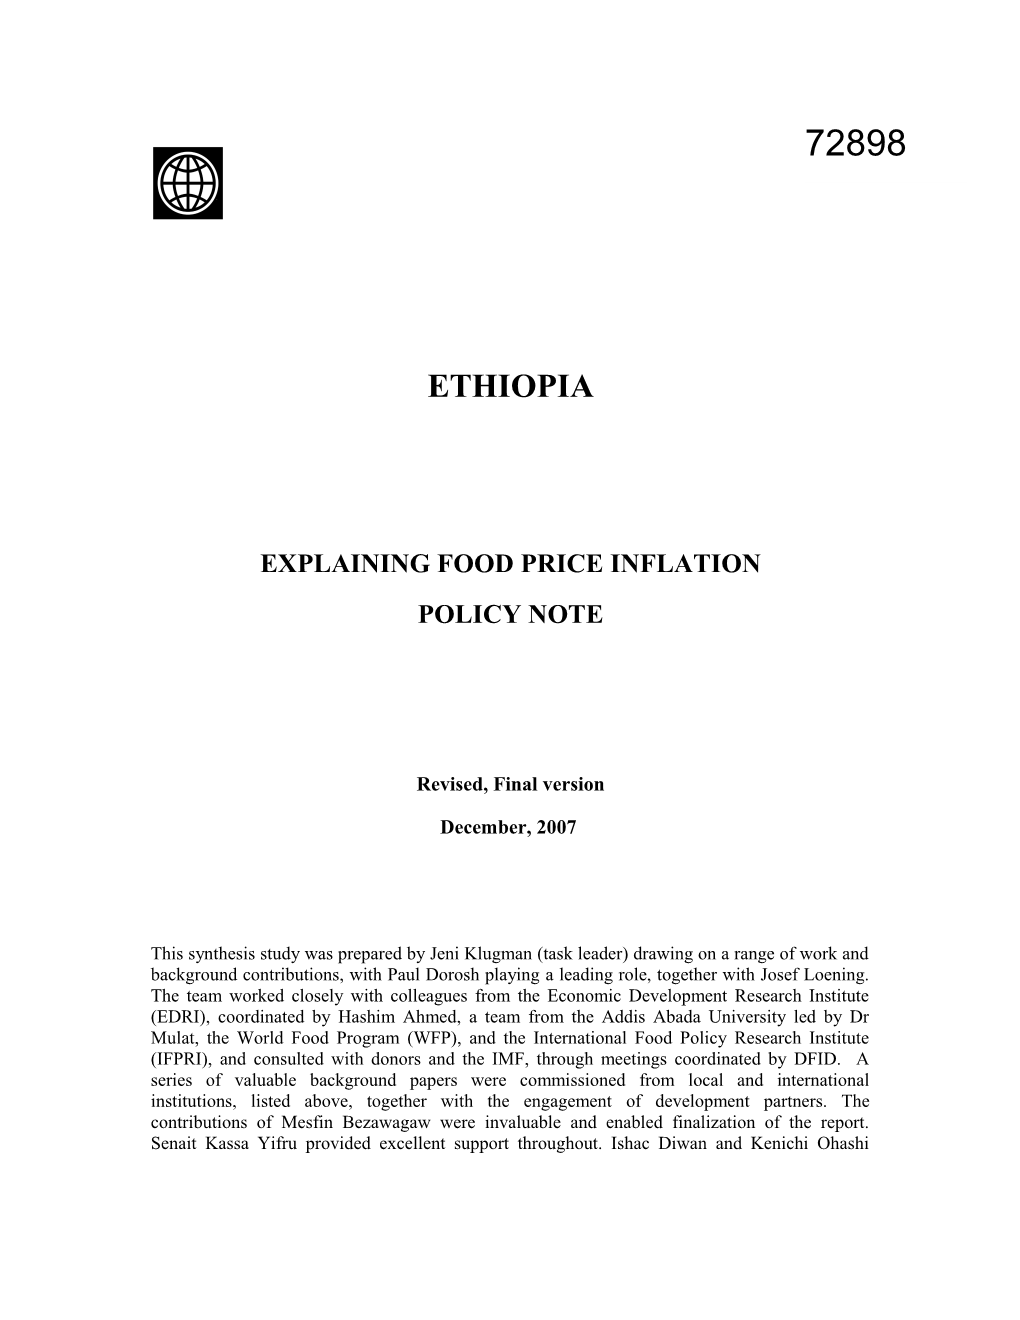 Explaining Sources of Food Price Inflation in Ethiopia